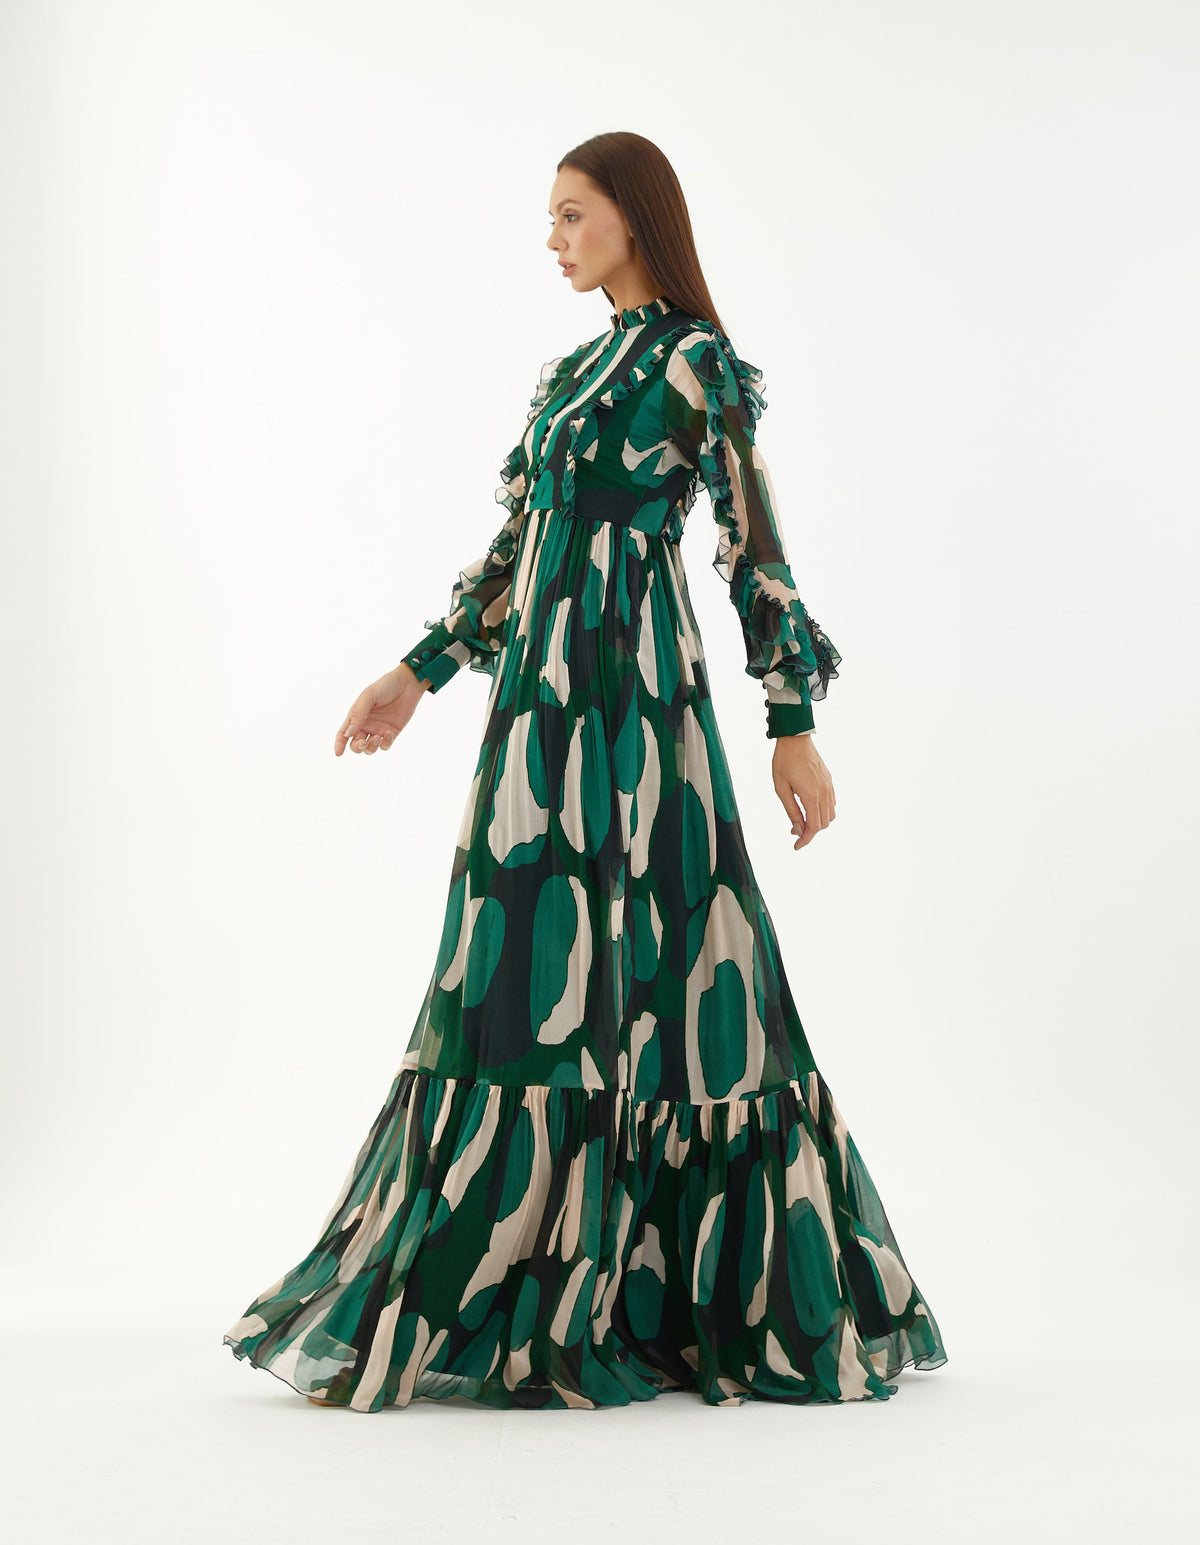 GREEN, BLACK AND OFF-WHITE ABSTRACT FRILL LONG DRESS